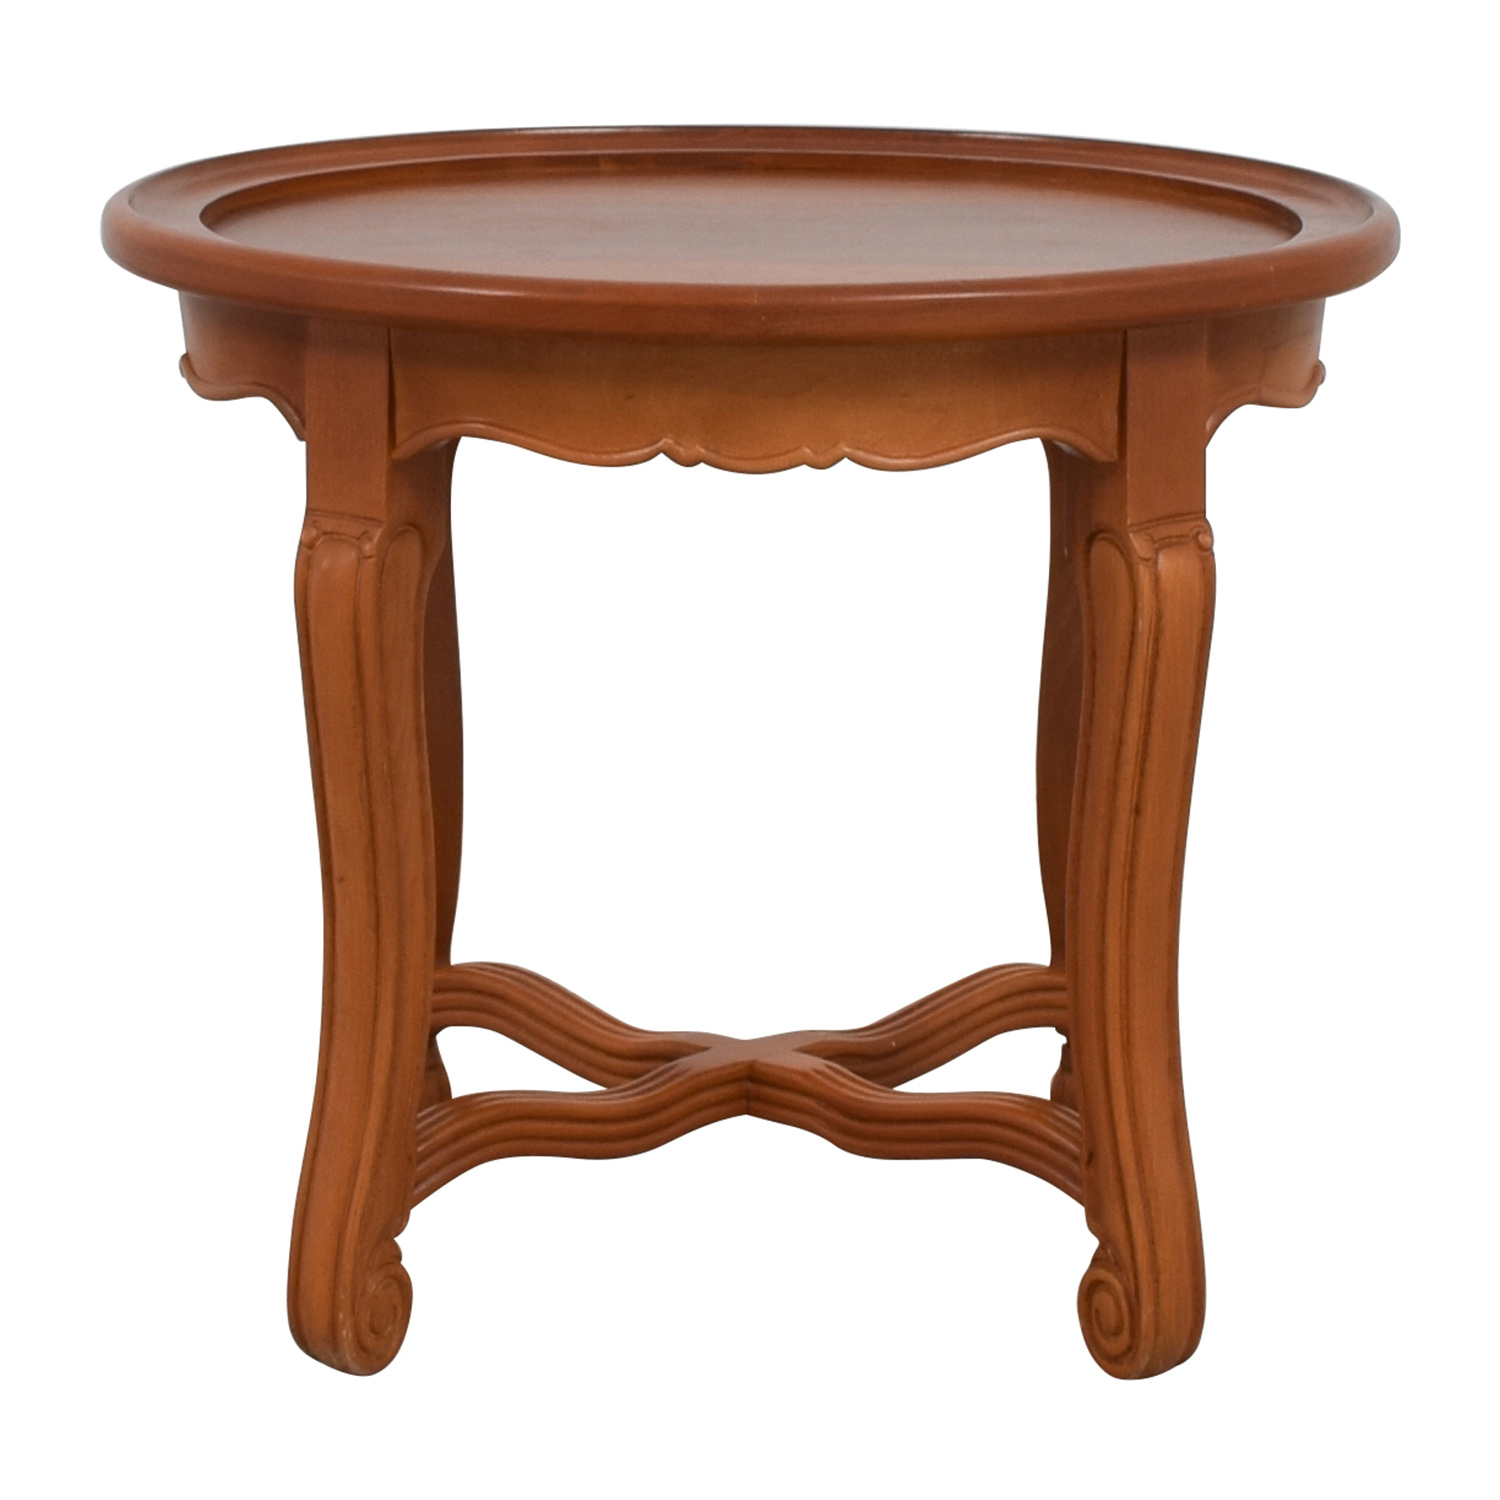 off round antique wood side table tables end small wrought iron with umbrella hole tablecloths leick furniture magazine projects oval accent dog crate cover plans ashley chairs